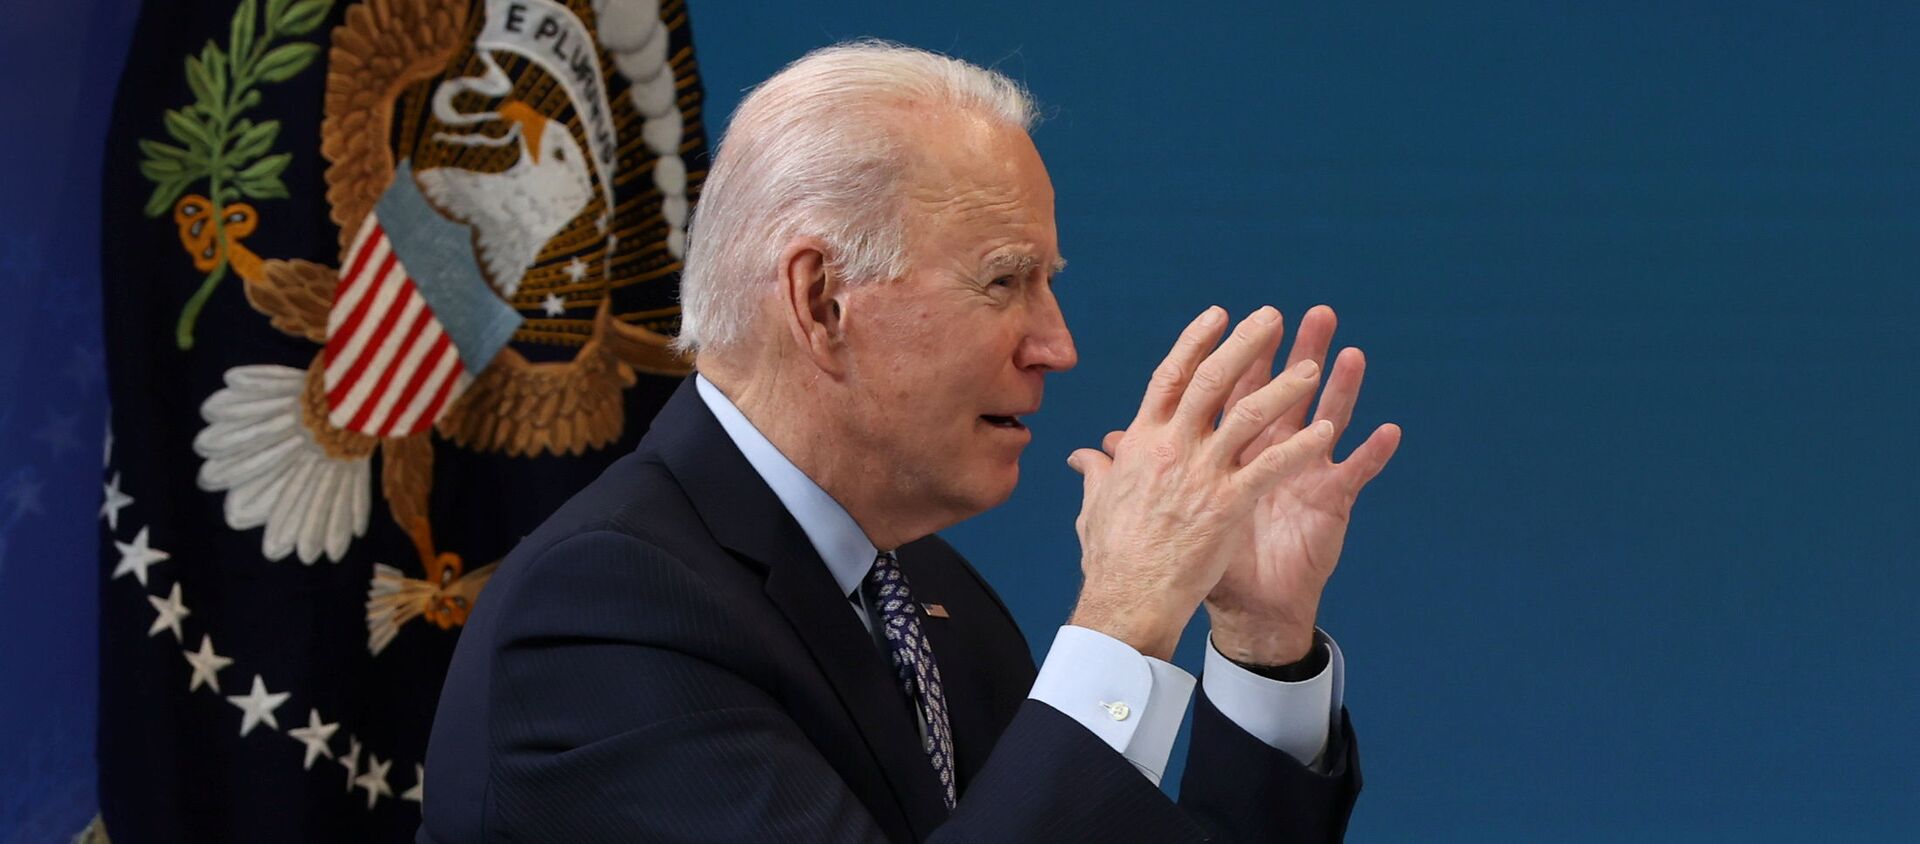 U.S. President Joe Biden delivers remarks virtually to the National Governors Association Winter Meeting from the South Court Auditorium at the White House in Washington, U.S., February 25, 2021 - Sputnik International, 1920, 26.02.2021